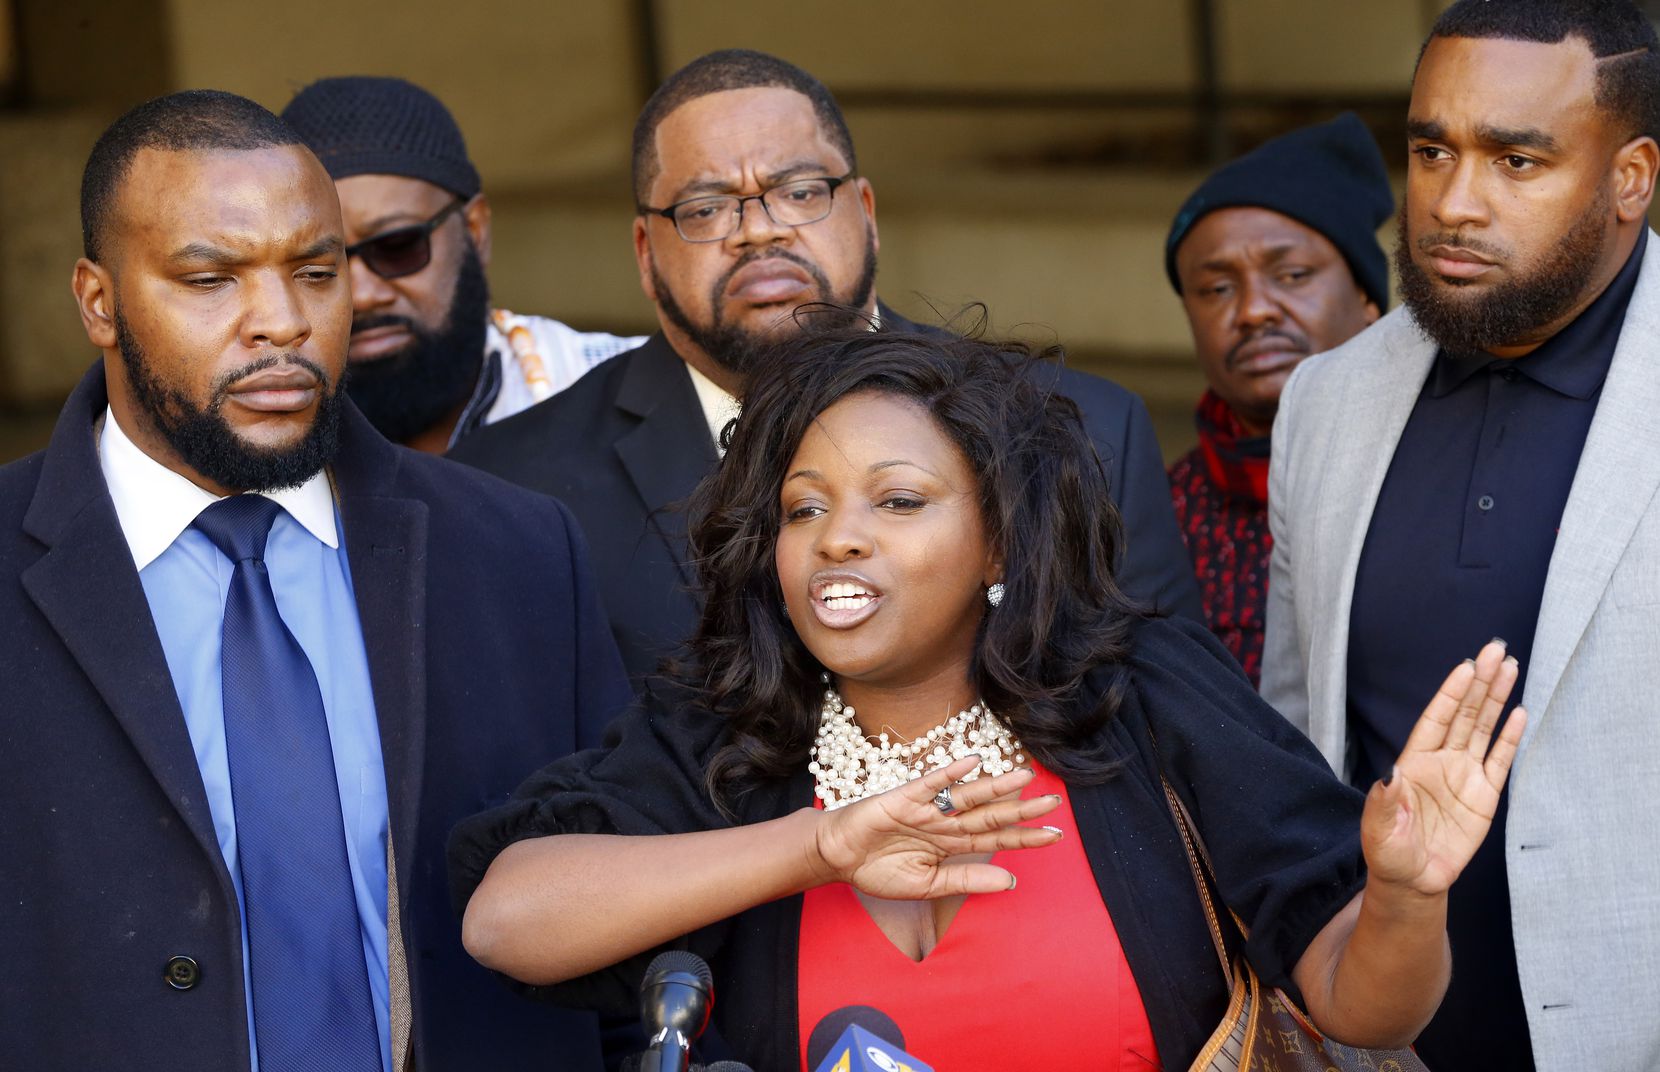 Jasmine Crockett, an attorney for the Craig family, responds to Fort Worth police Chief Joel Fitzgerald's decision to suspend an officer for 10 days without pay. (Tom Fox/Staff Photographer)